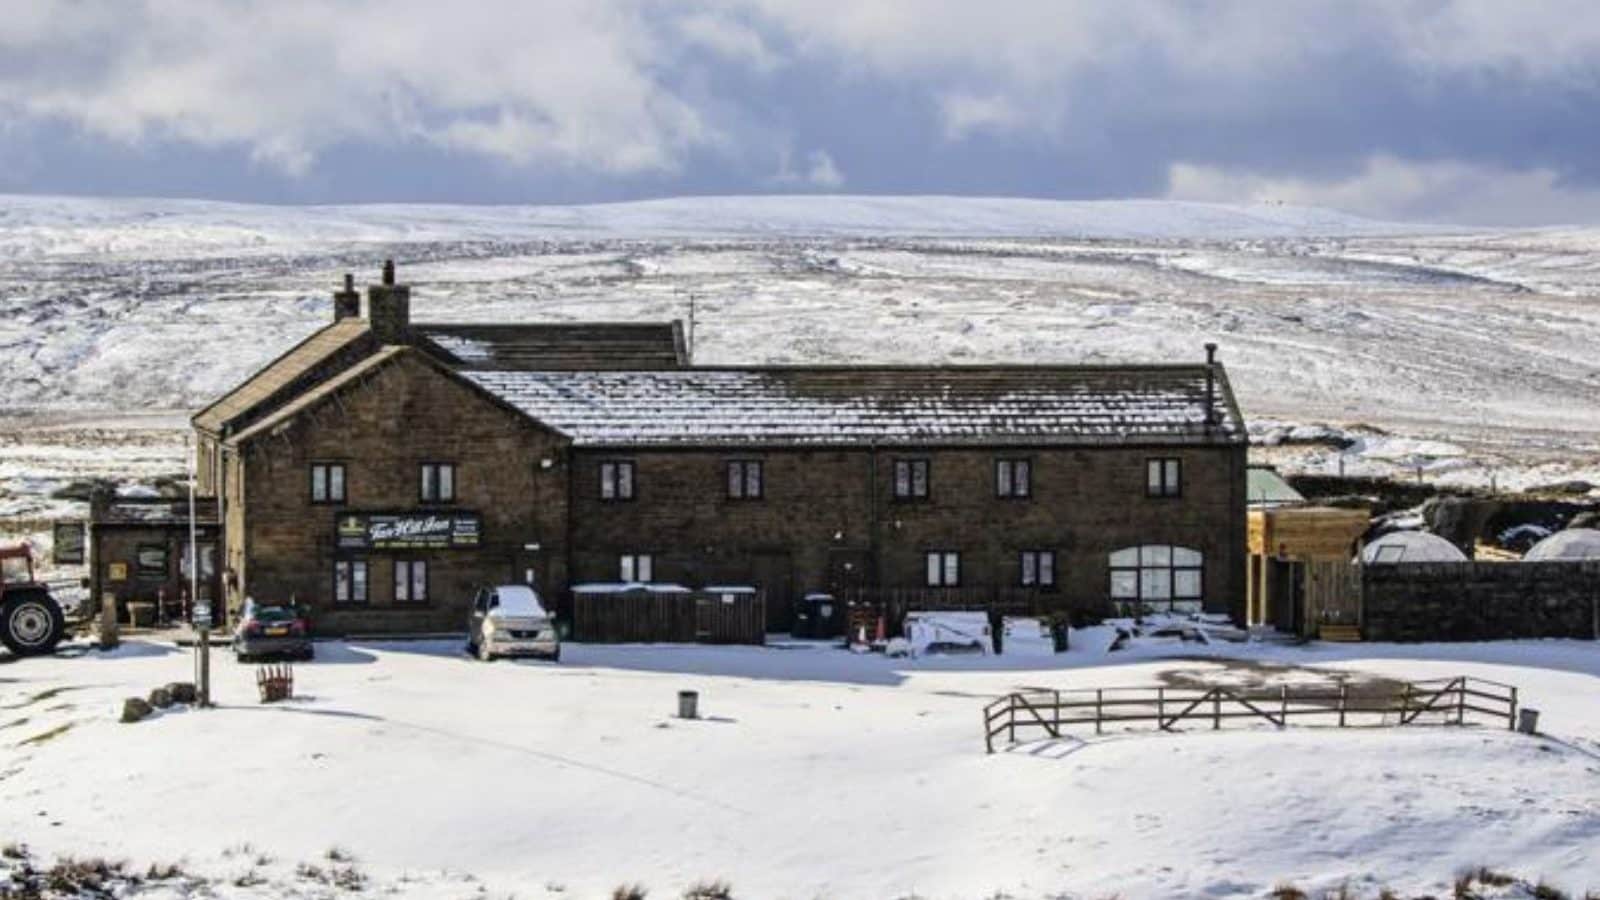 Storm Arwen: Guests Stuck at Britain's Highest Pub Freed After 3 Nights of Snowy Revelry